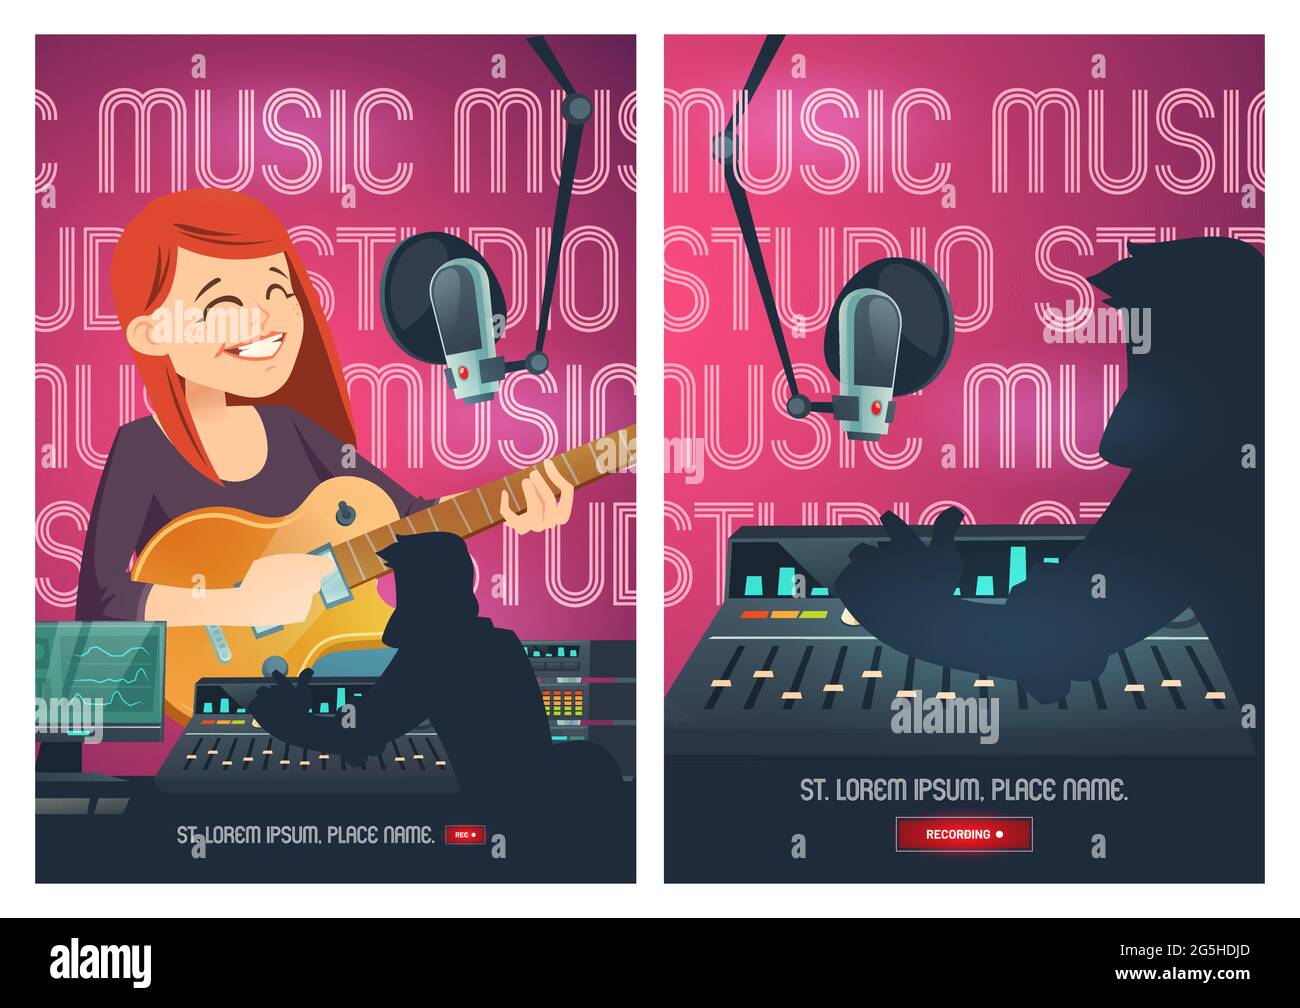 Recording studio cartoon poster, singer woman with guitar sing in music booth with microphone and engineer capturing, mixing and mastering samples on sound recorder board, vector illustration Stock Vector